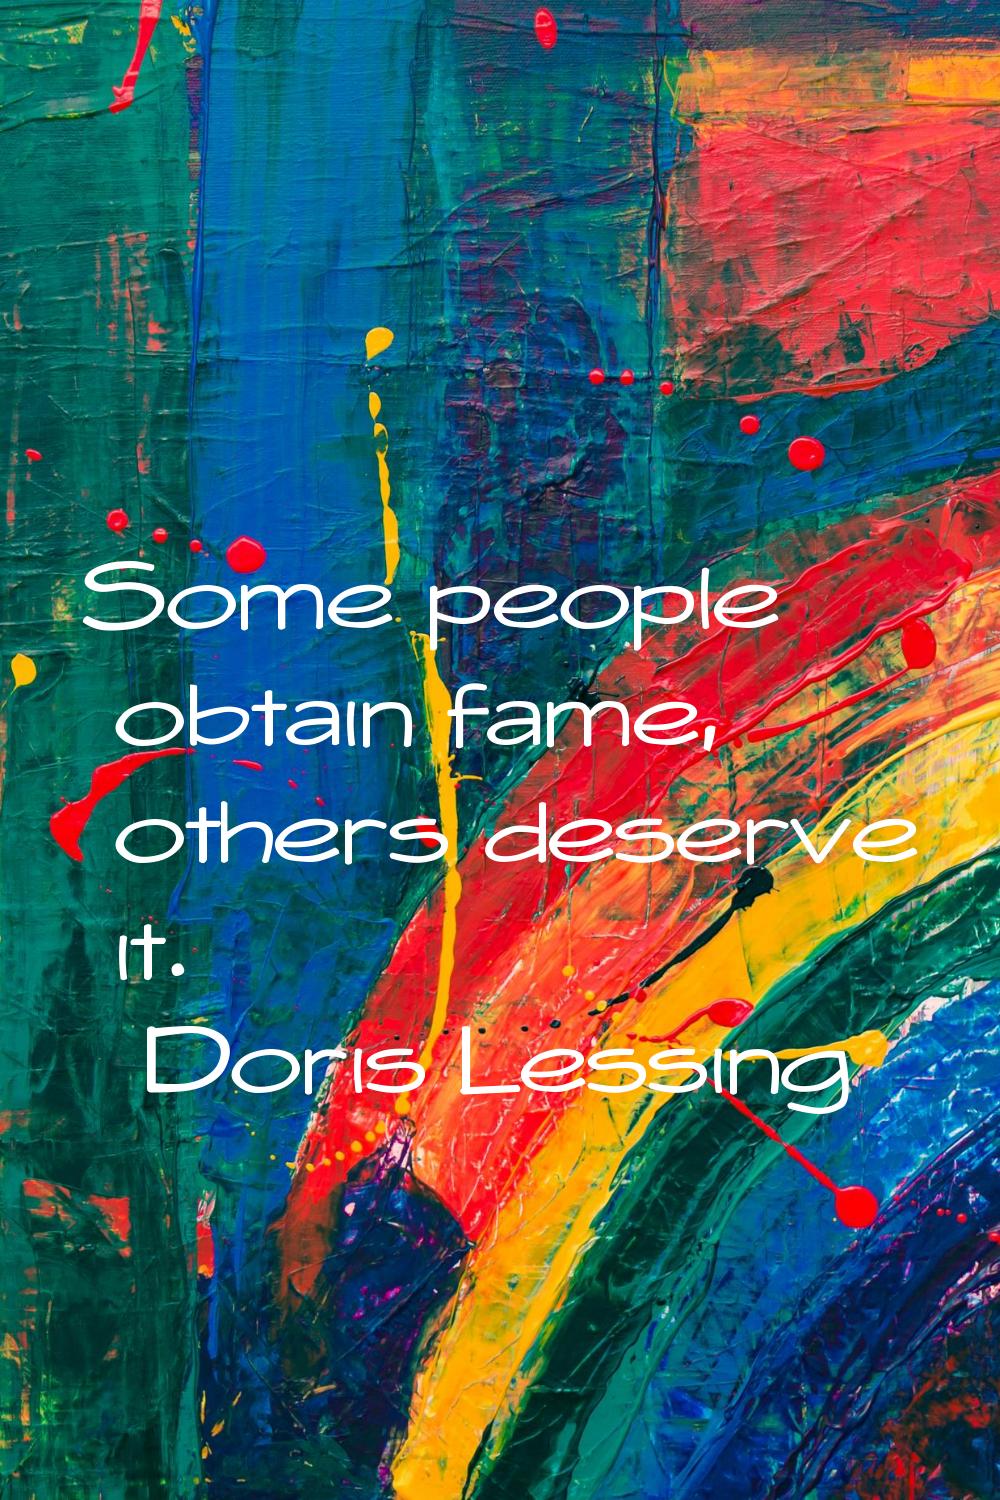 Some people obtain fame, others deserve it.